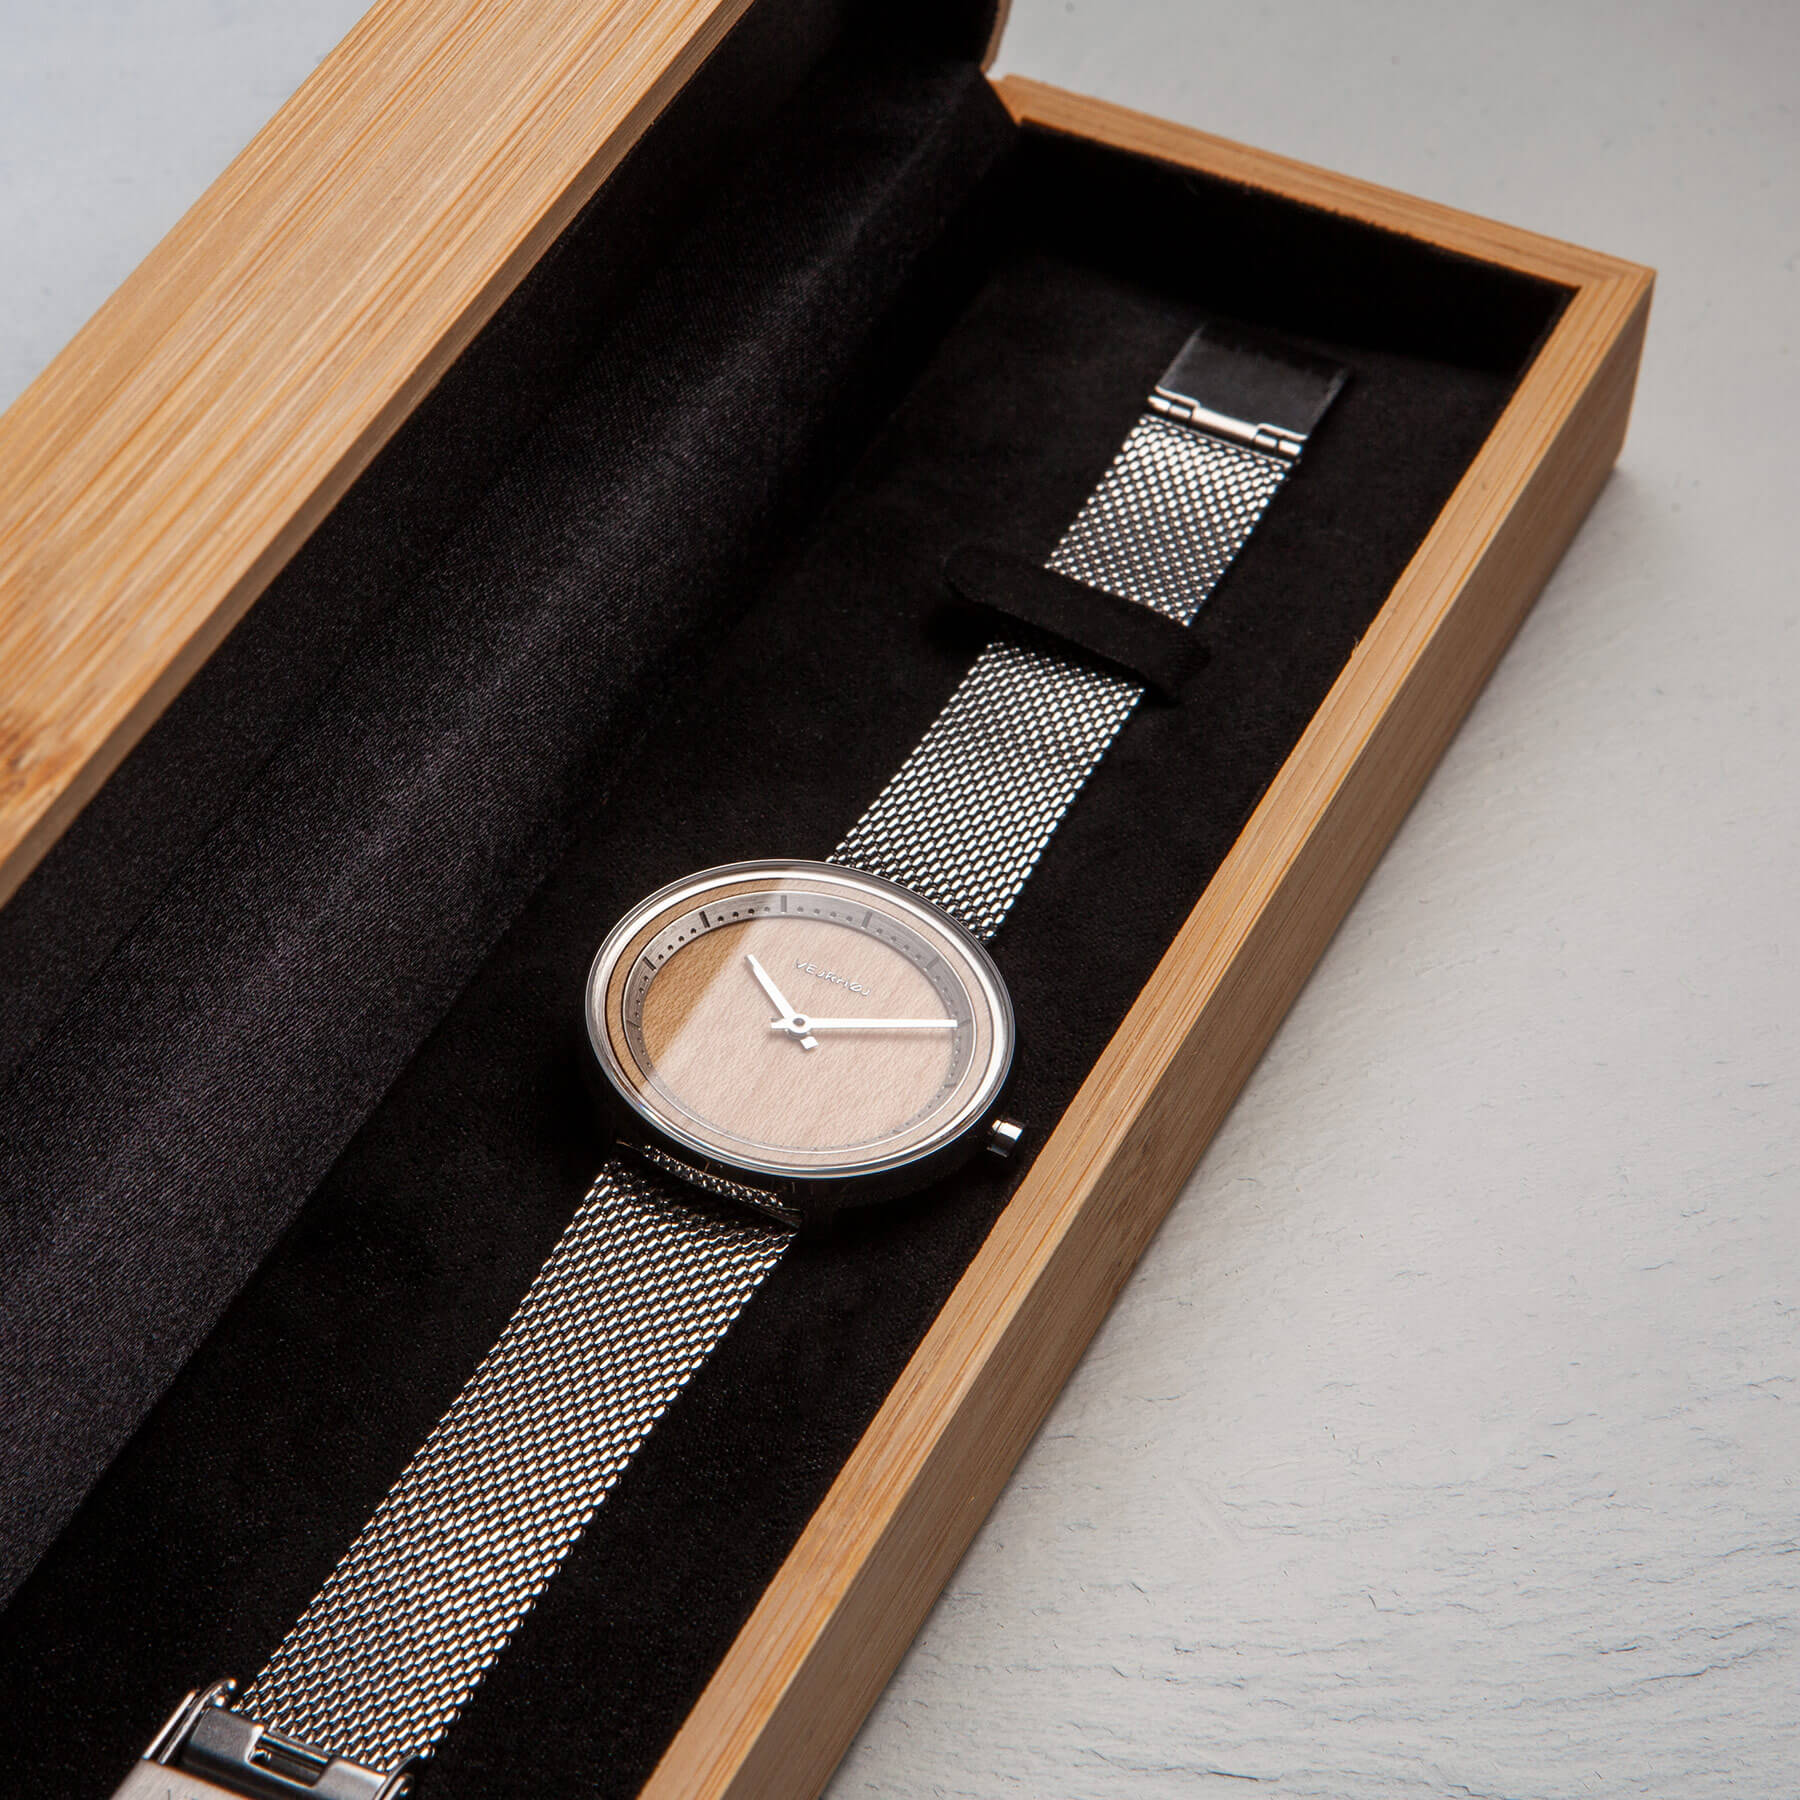 34mm female wood watch with silver mesh band